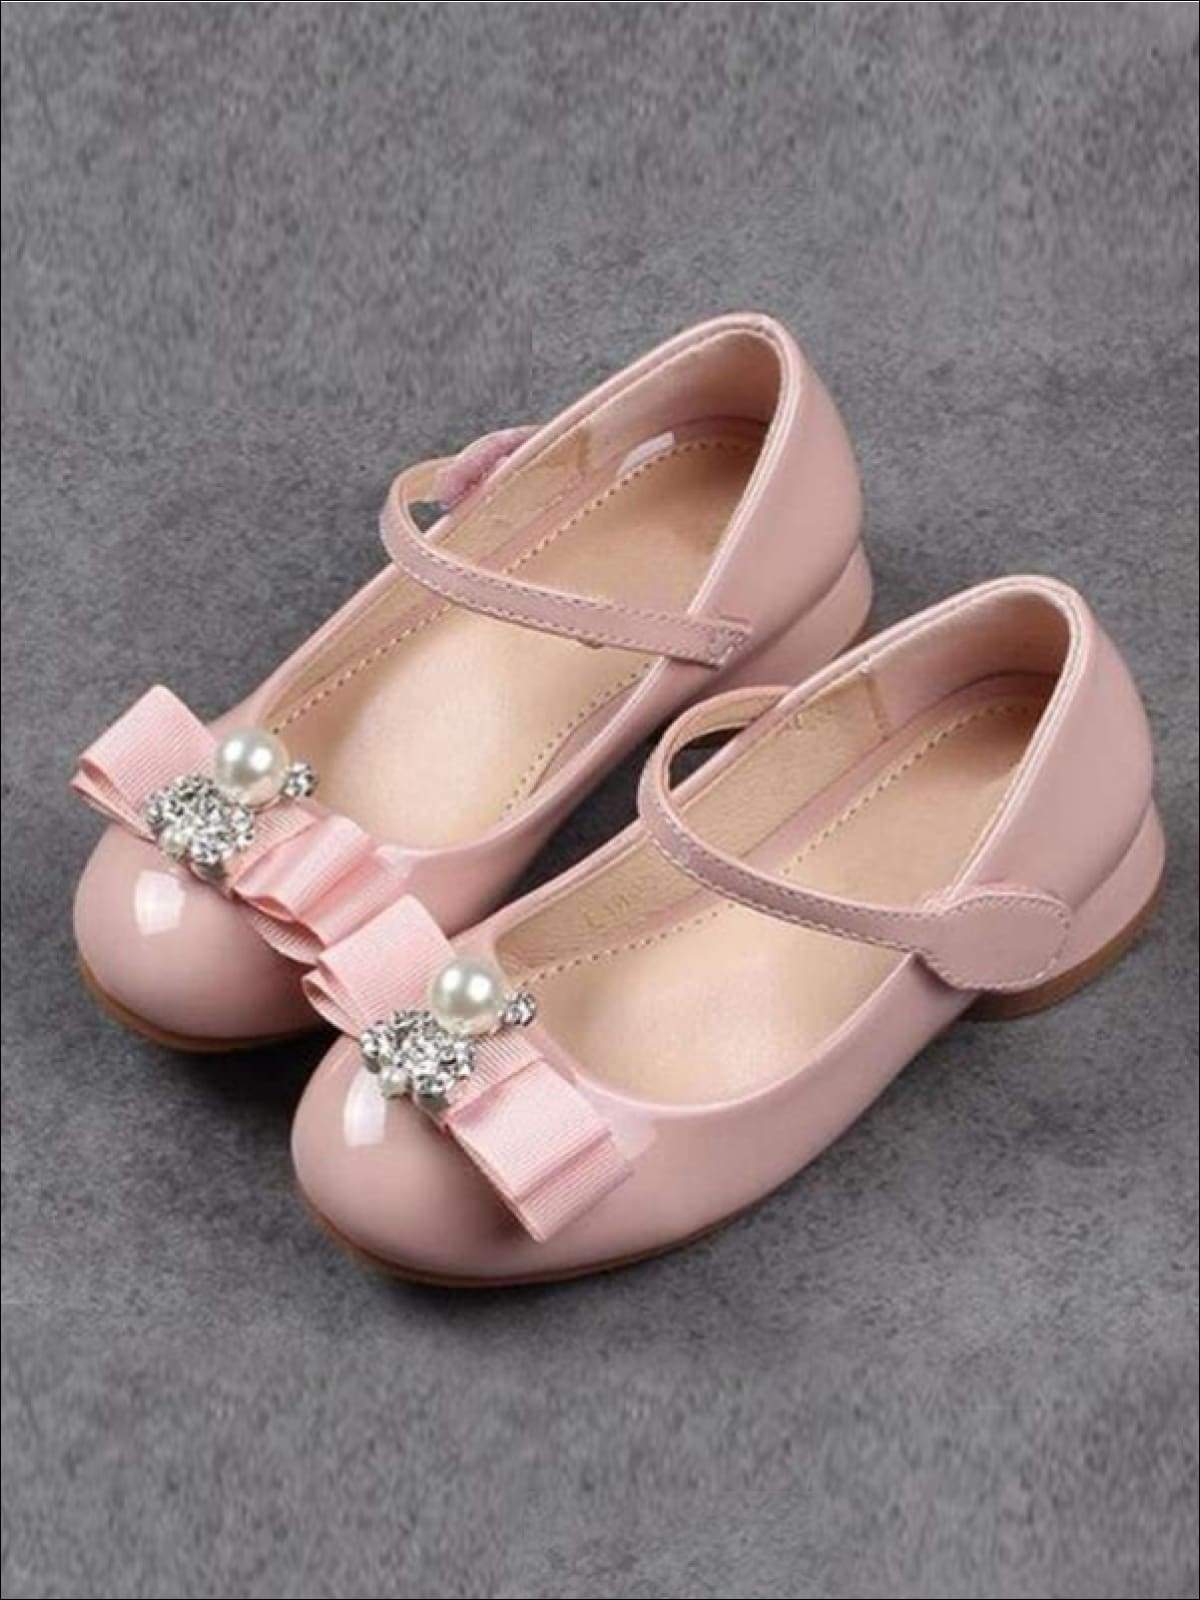 Girls Rhinestone Embellished Bow Tie Princess Shoes with Ankle Strap (Pink & Black) - Pink / 1 - Girls Flats